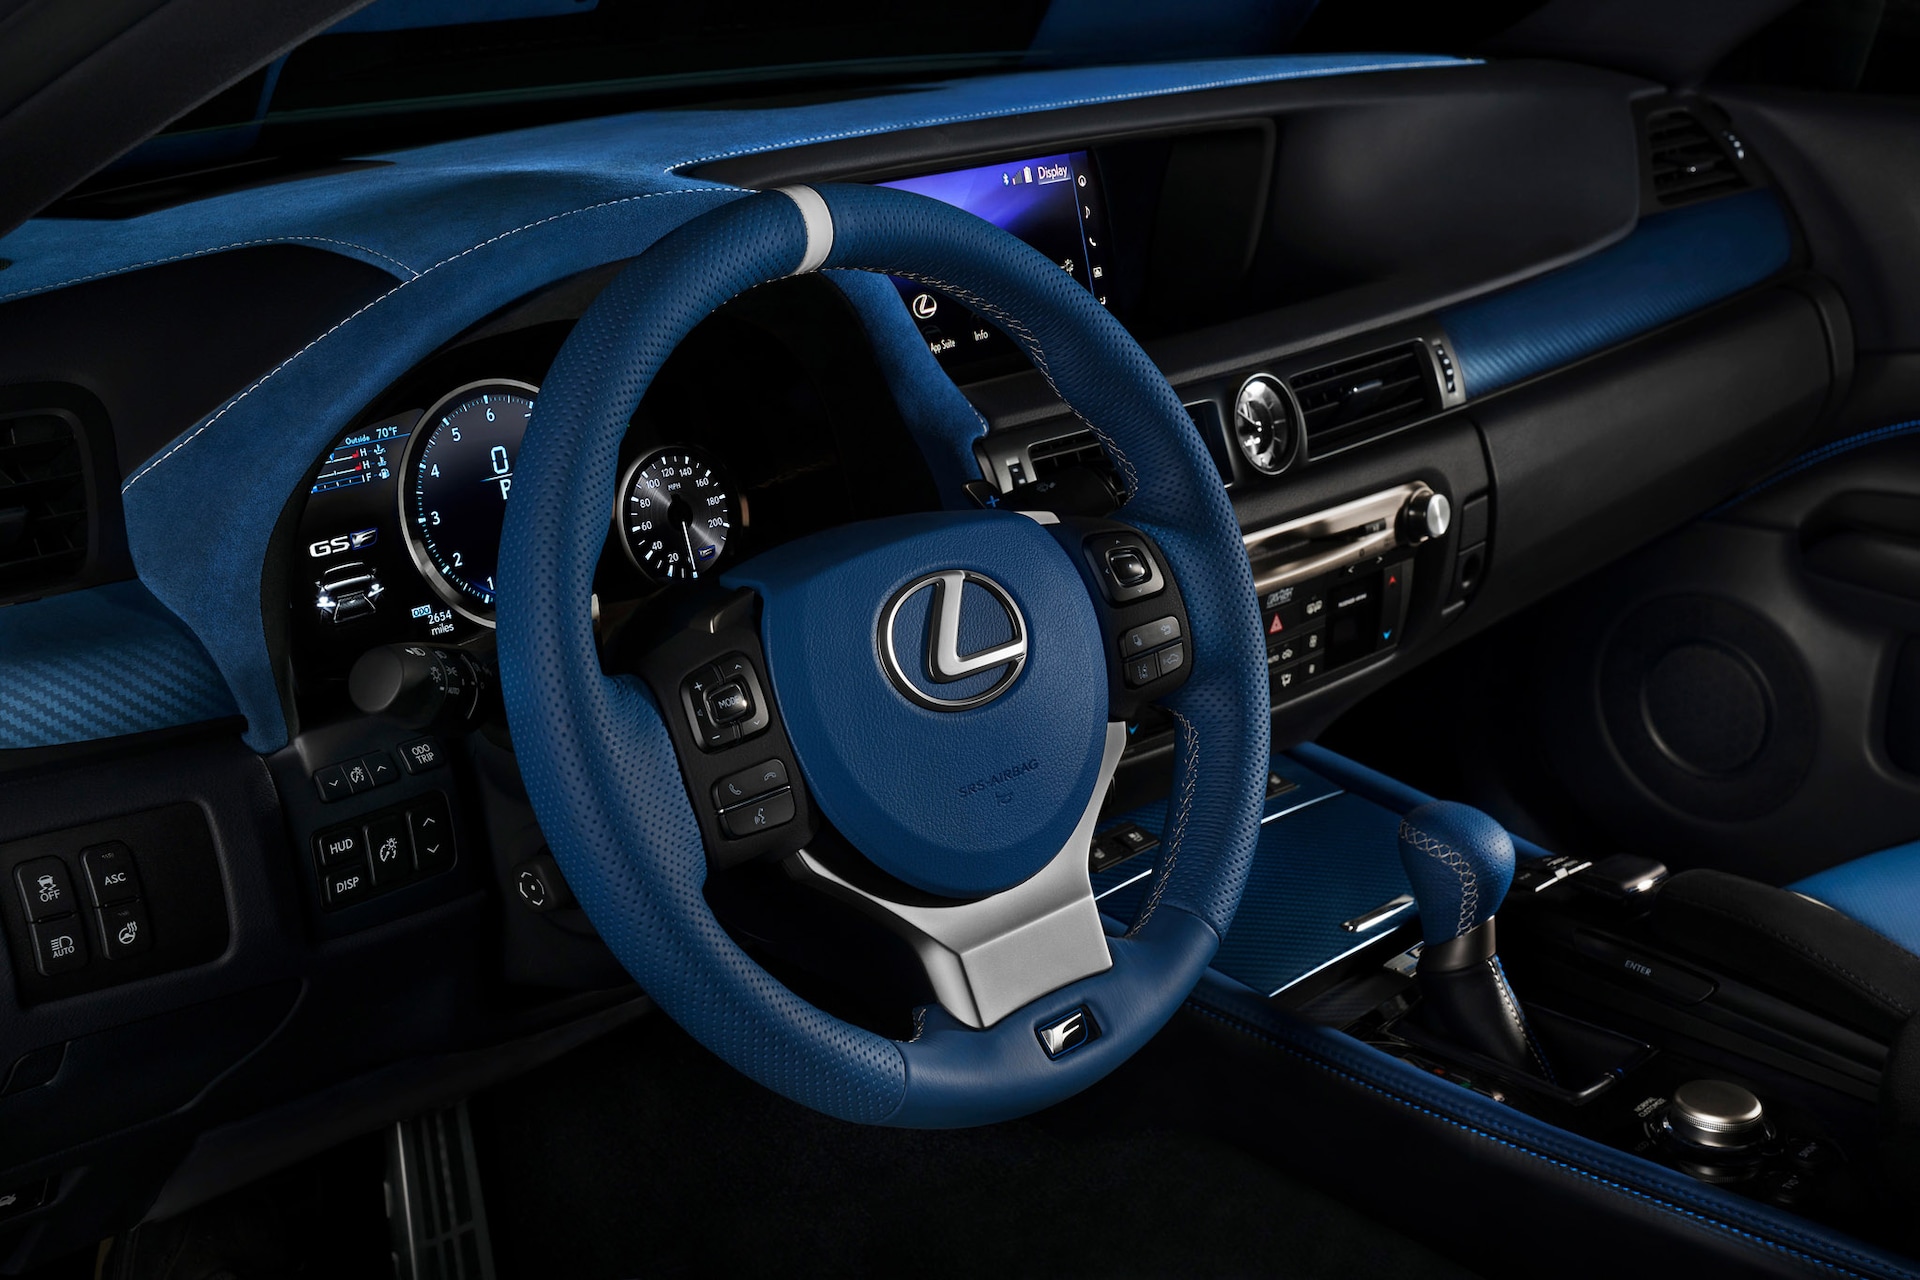 2019 Lexus GS F, RC F 10th Anniversary Editions on Sale Now